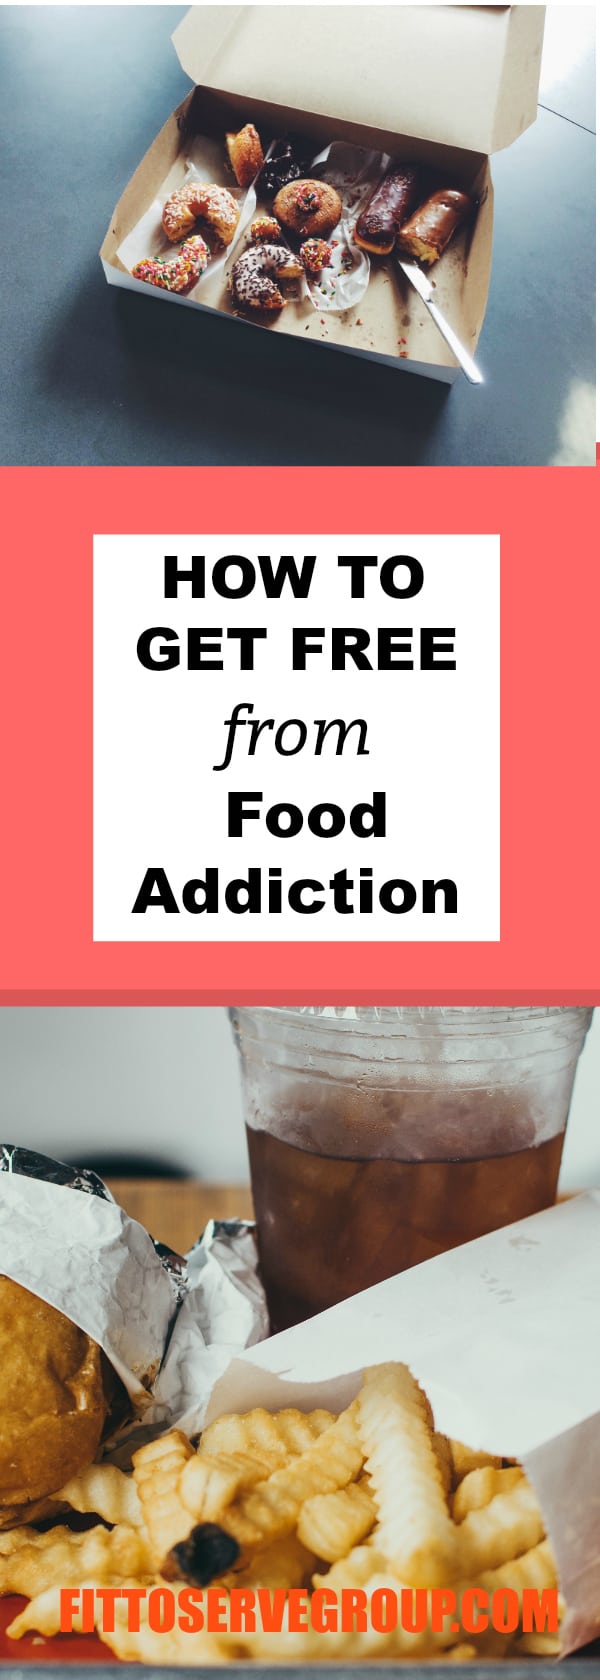 How to get free from food addiction